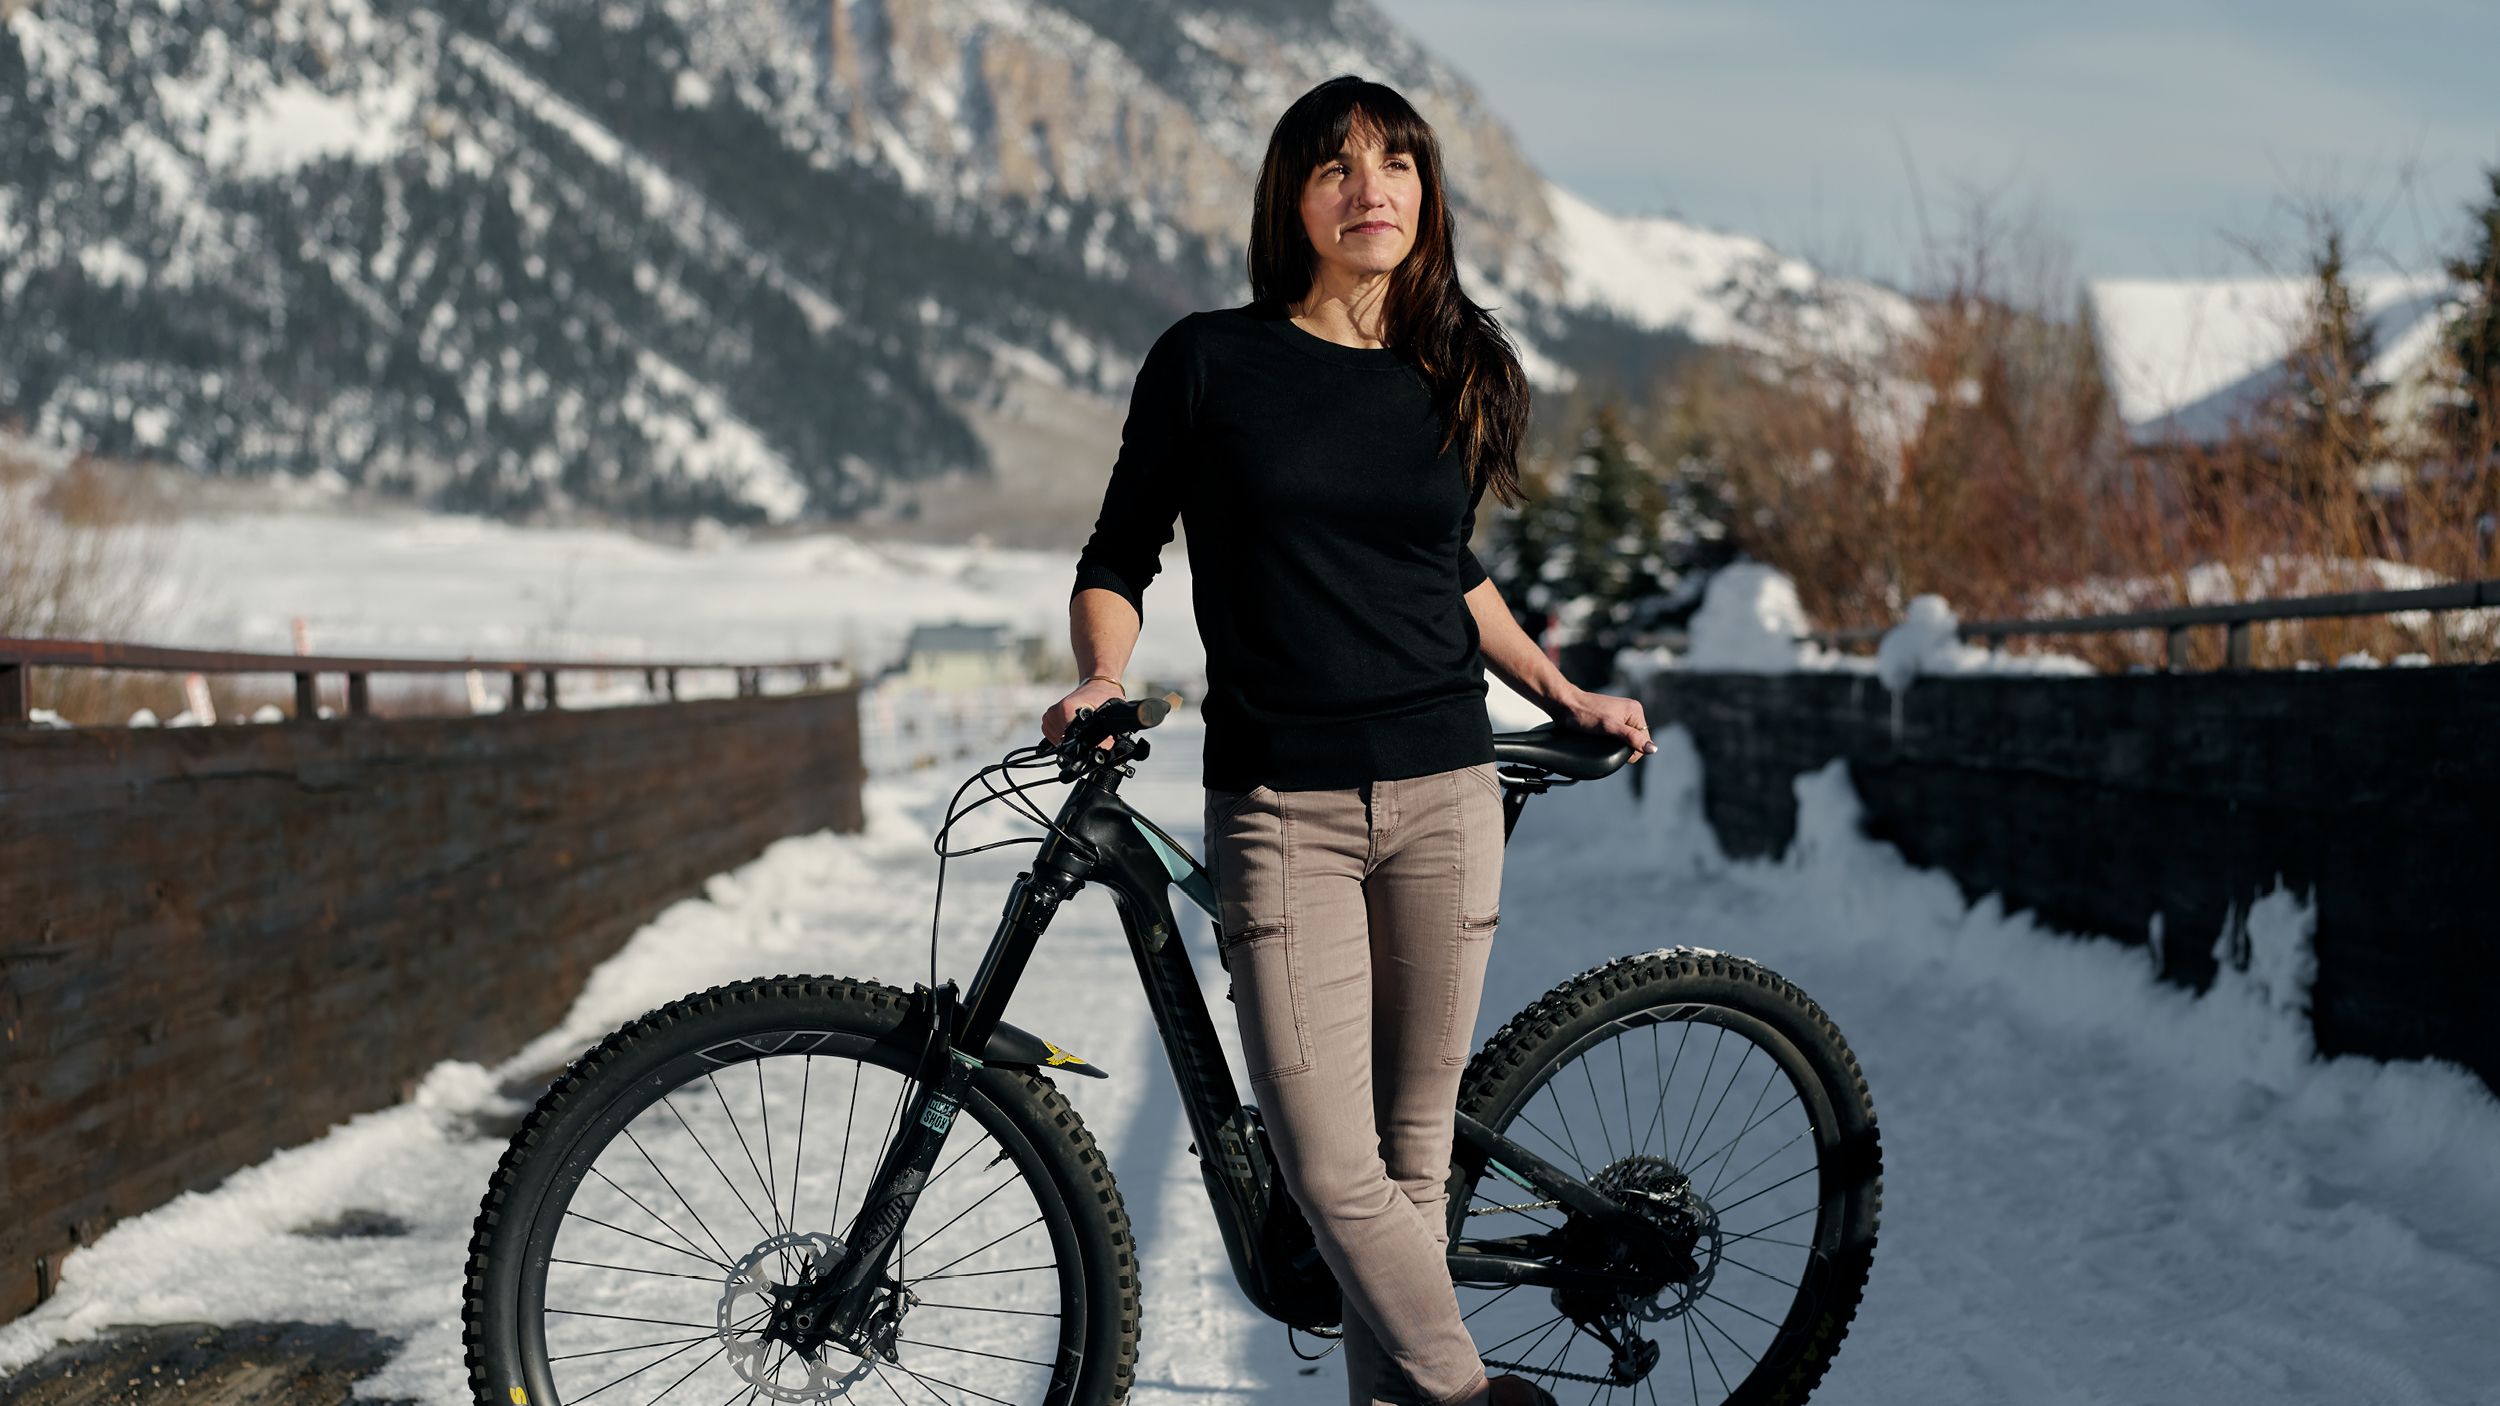 How Mountain Biking Helped Bonnie McDonald Cope With the Death of Her Fiancé